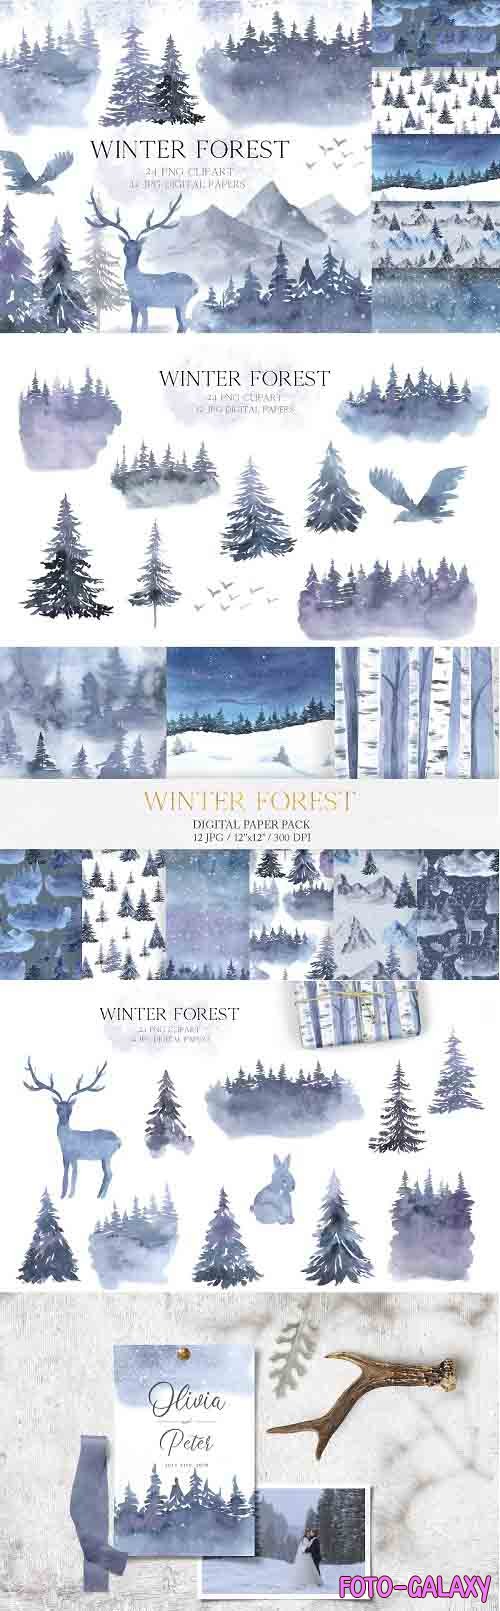 Watercolor Winter Forest Set - 5633566